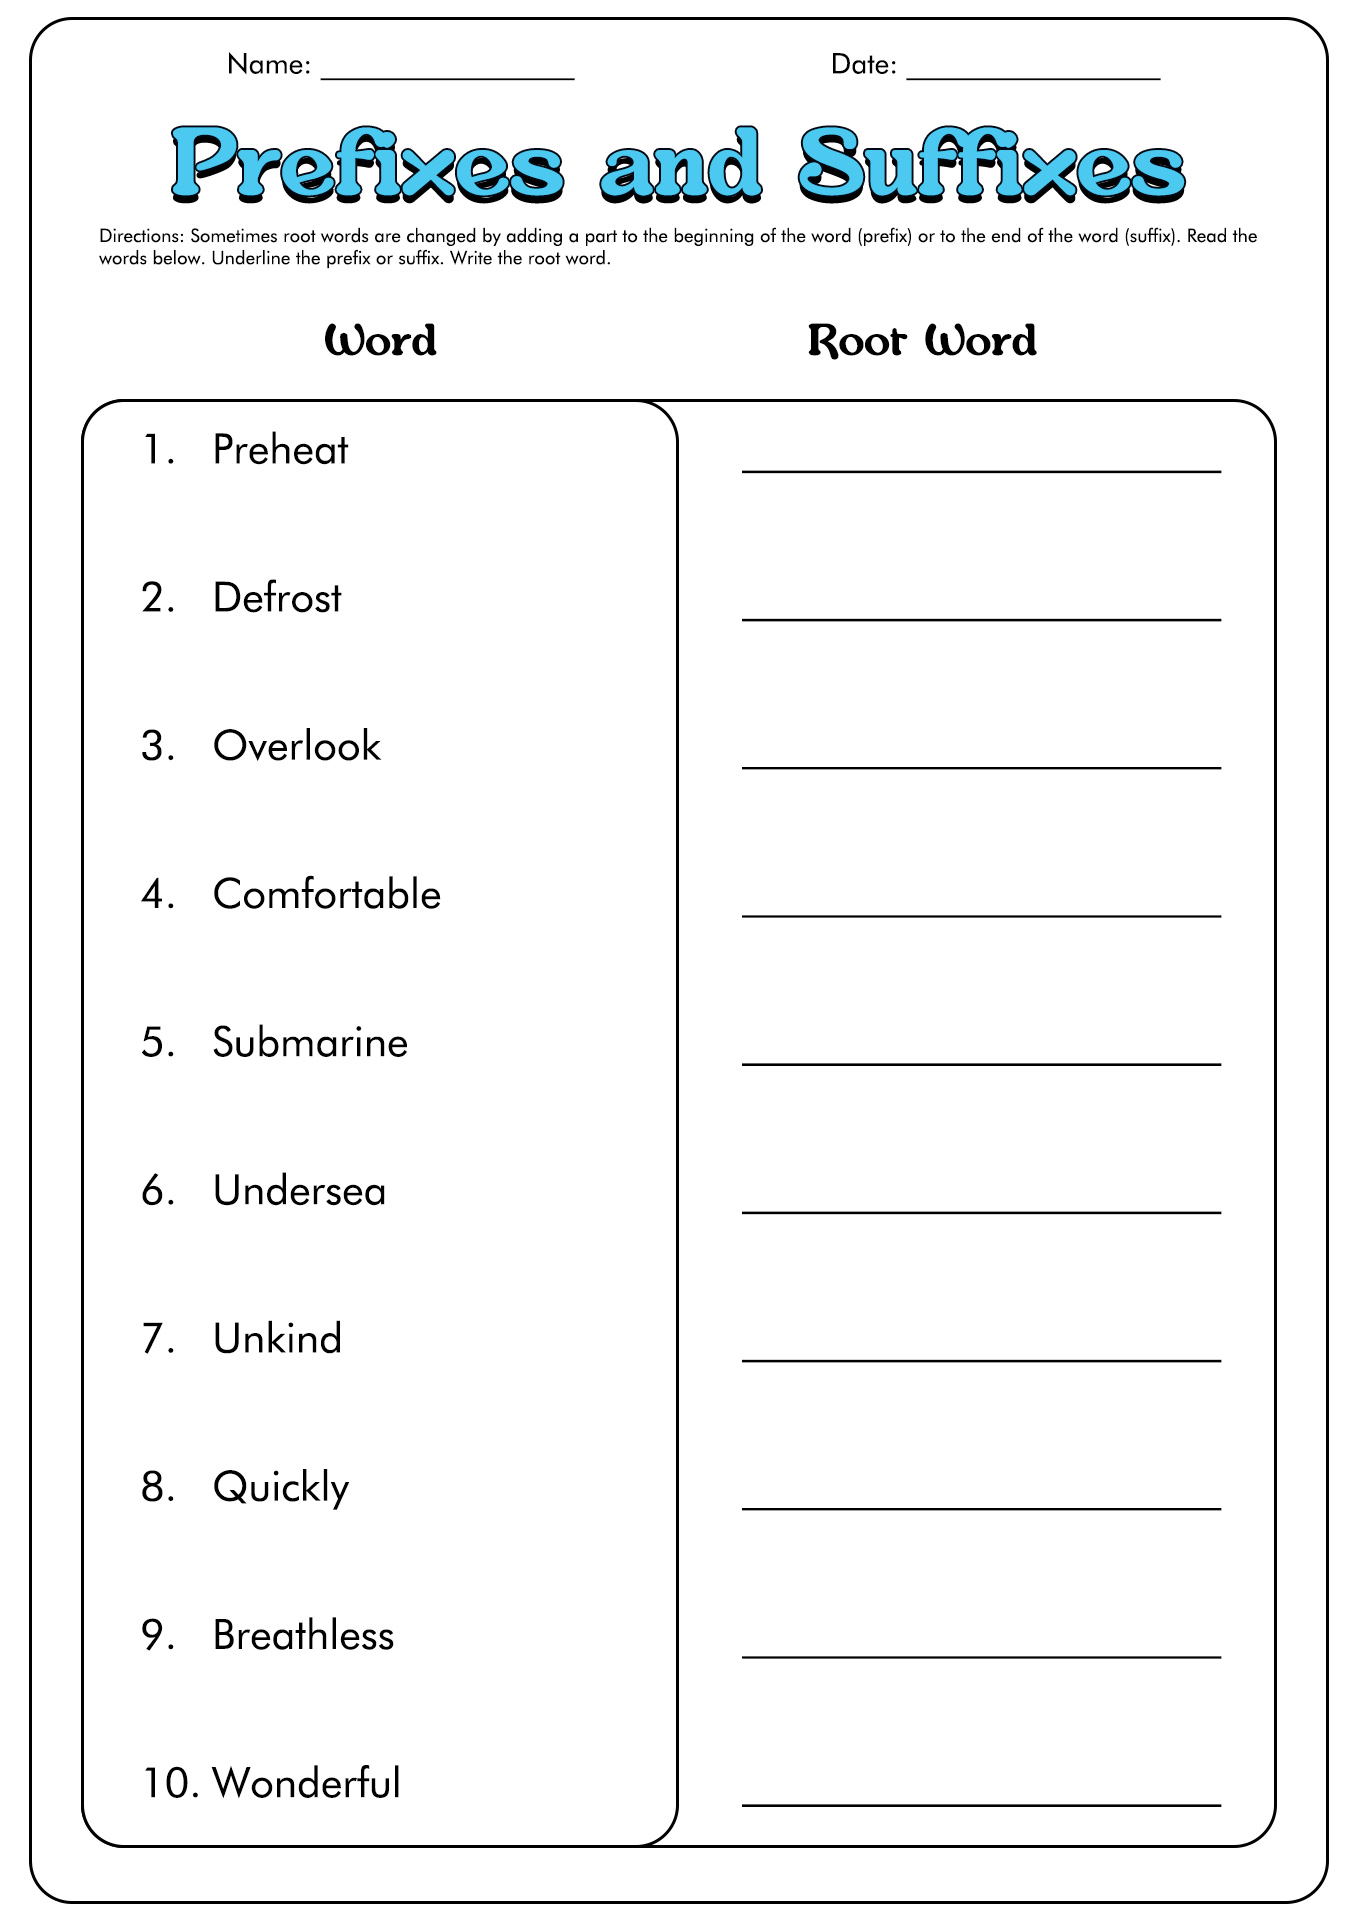 15 Best Images of Common Suffixes Worksheets - Prefixes and Suffixes